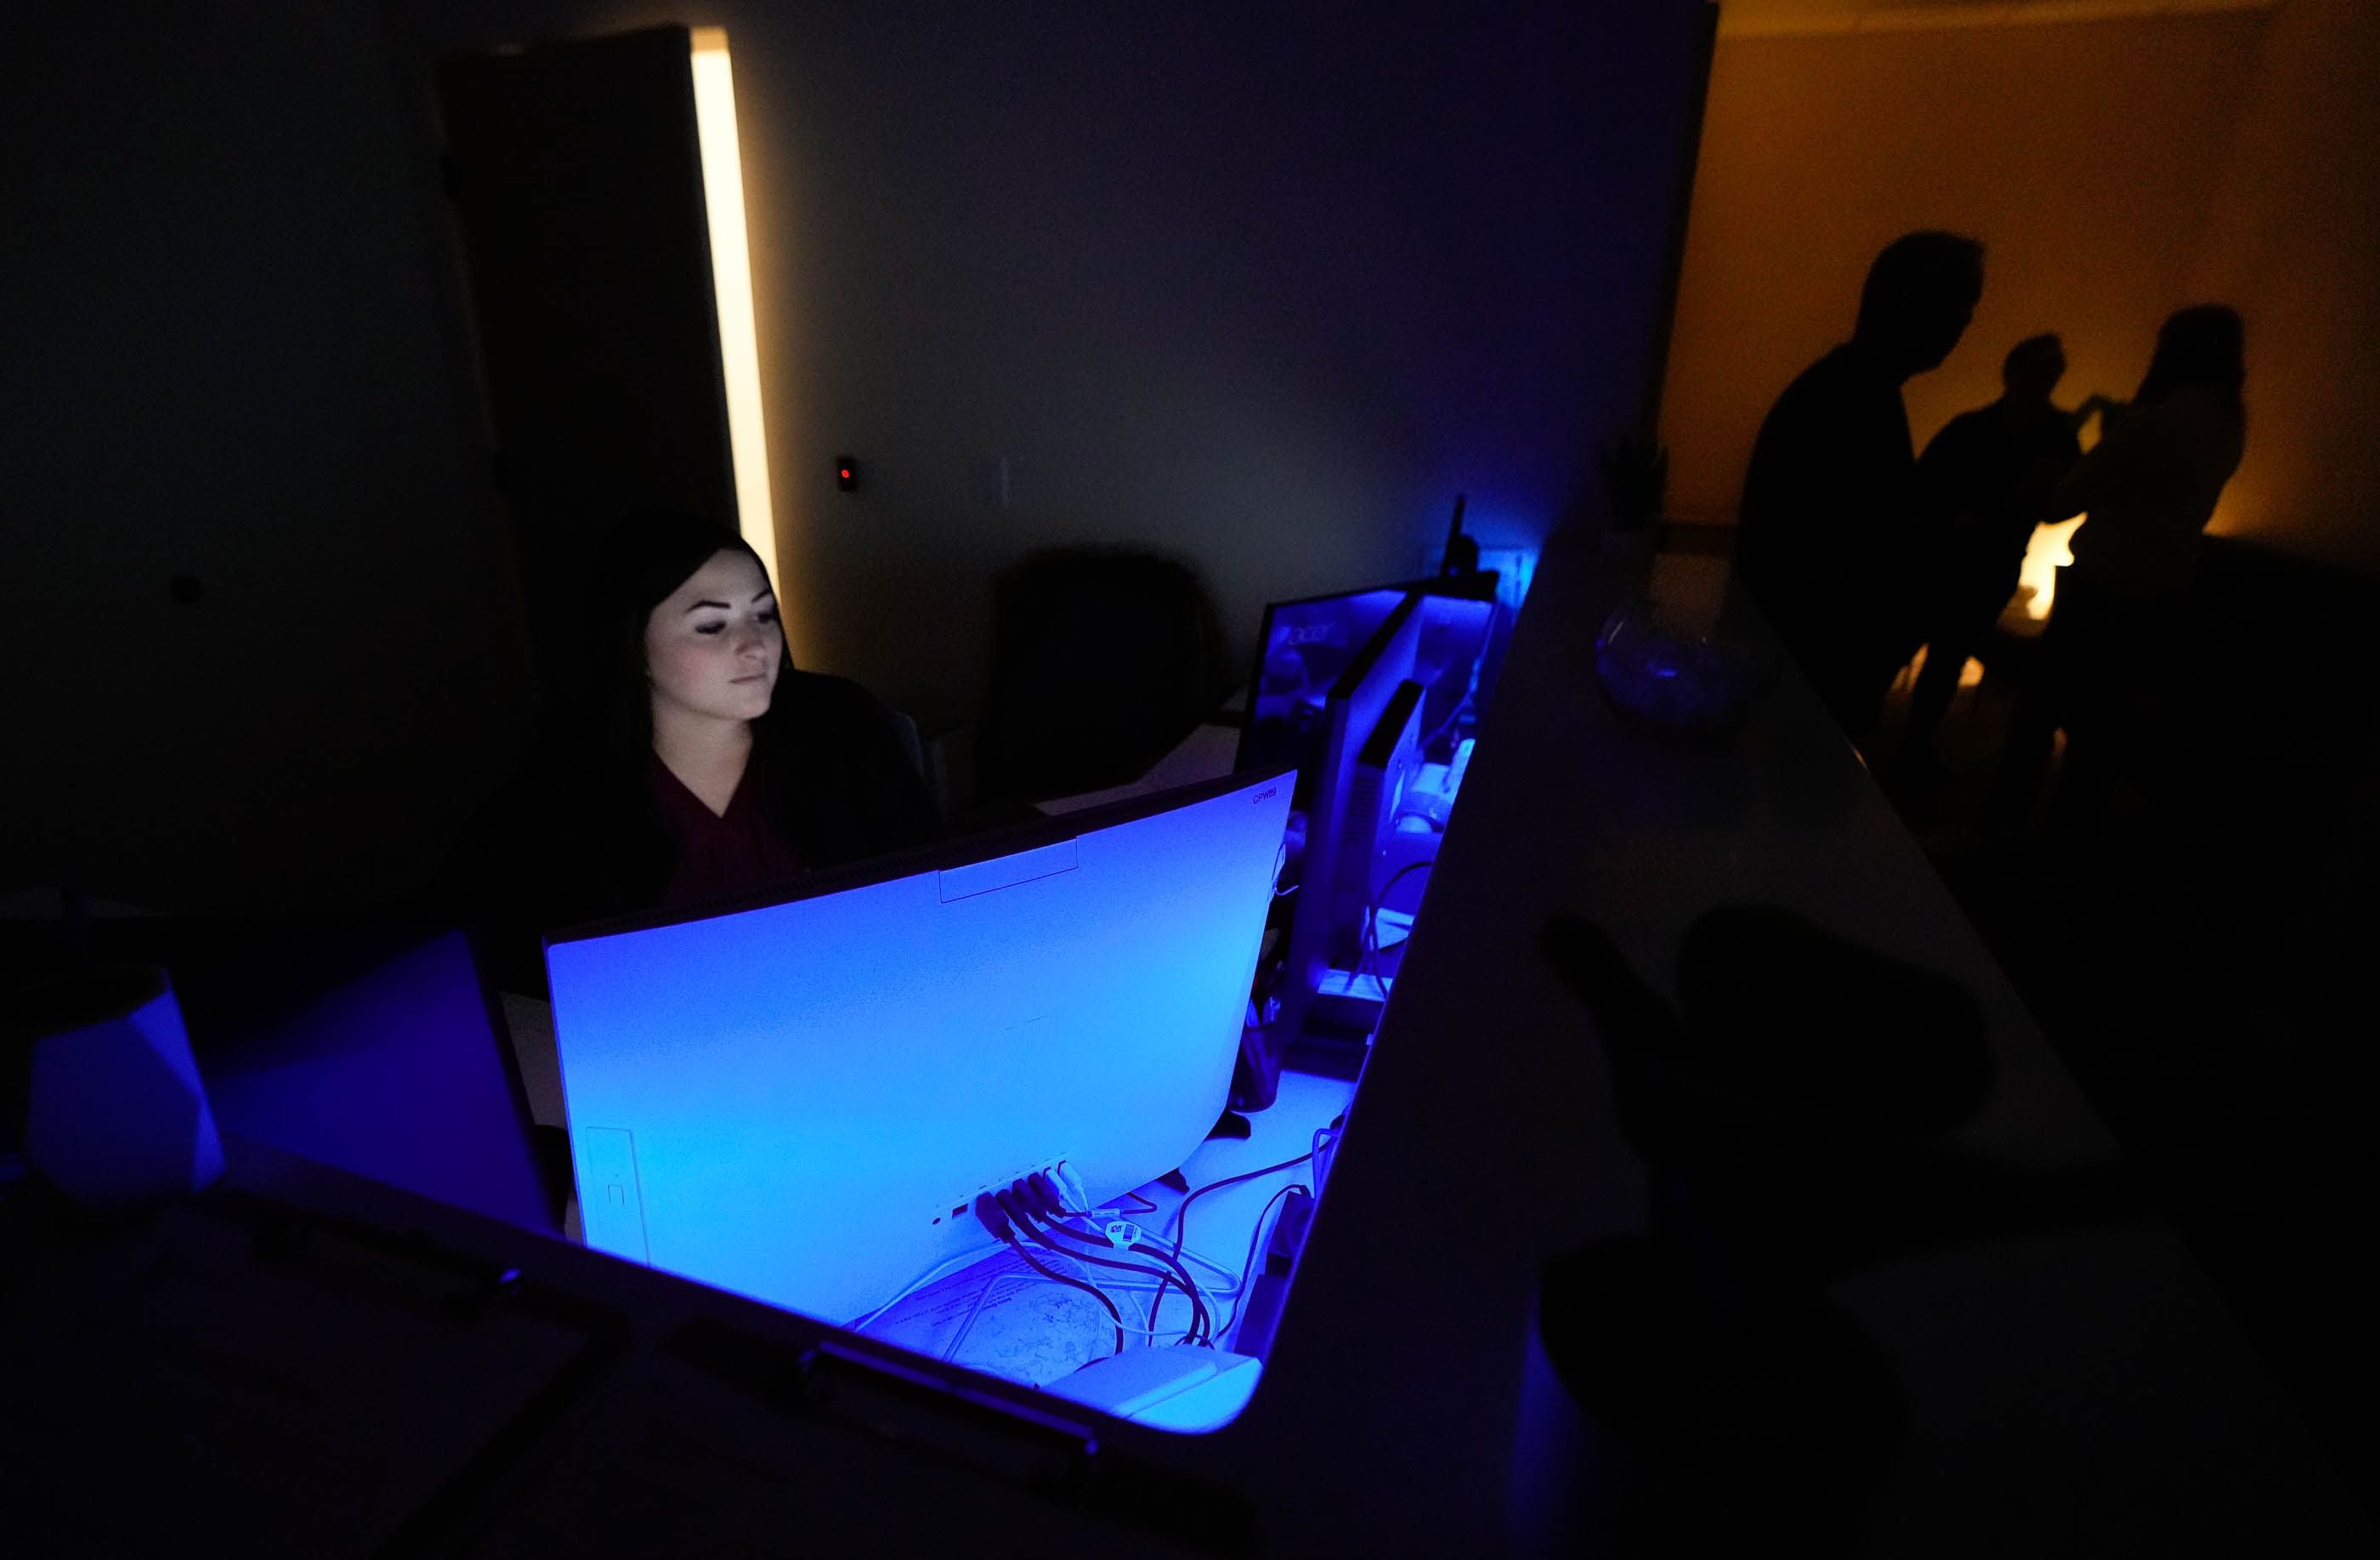 (Francisco Kjolseth | The Salt Lake Tribune) Medical assistant Regan Cropper works in the ketamine room at Numinus Wellness Inc. in Draper, where lights are kept dim to help patients with their experience, on Tuesday, March 28, 2023. 